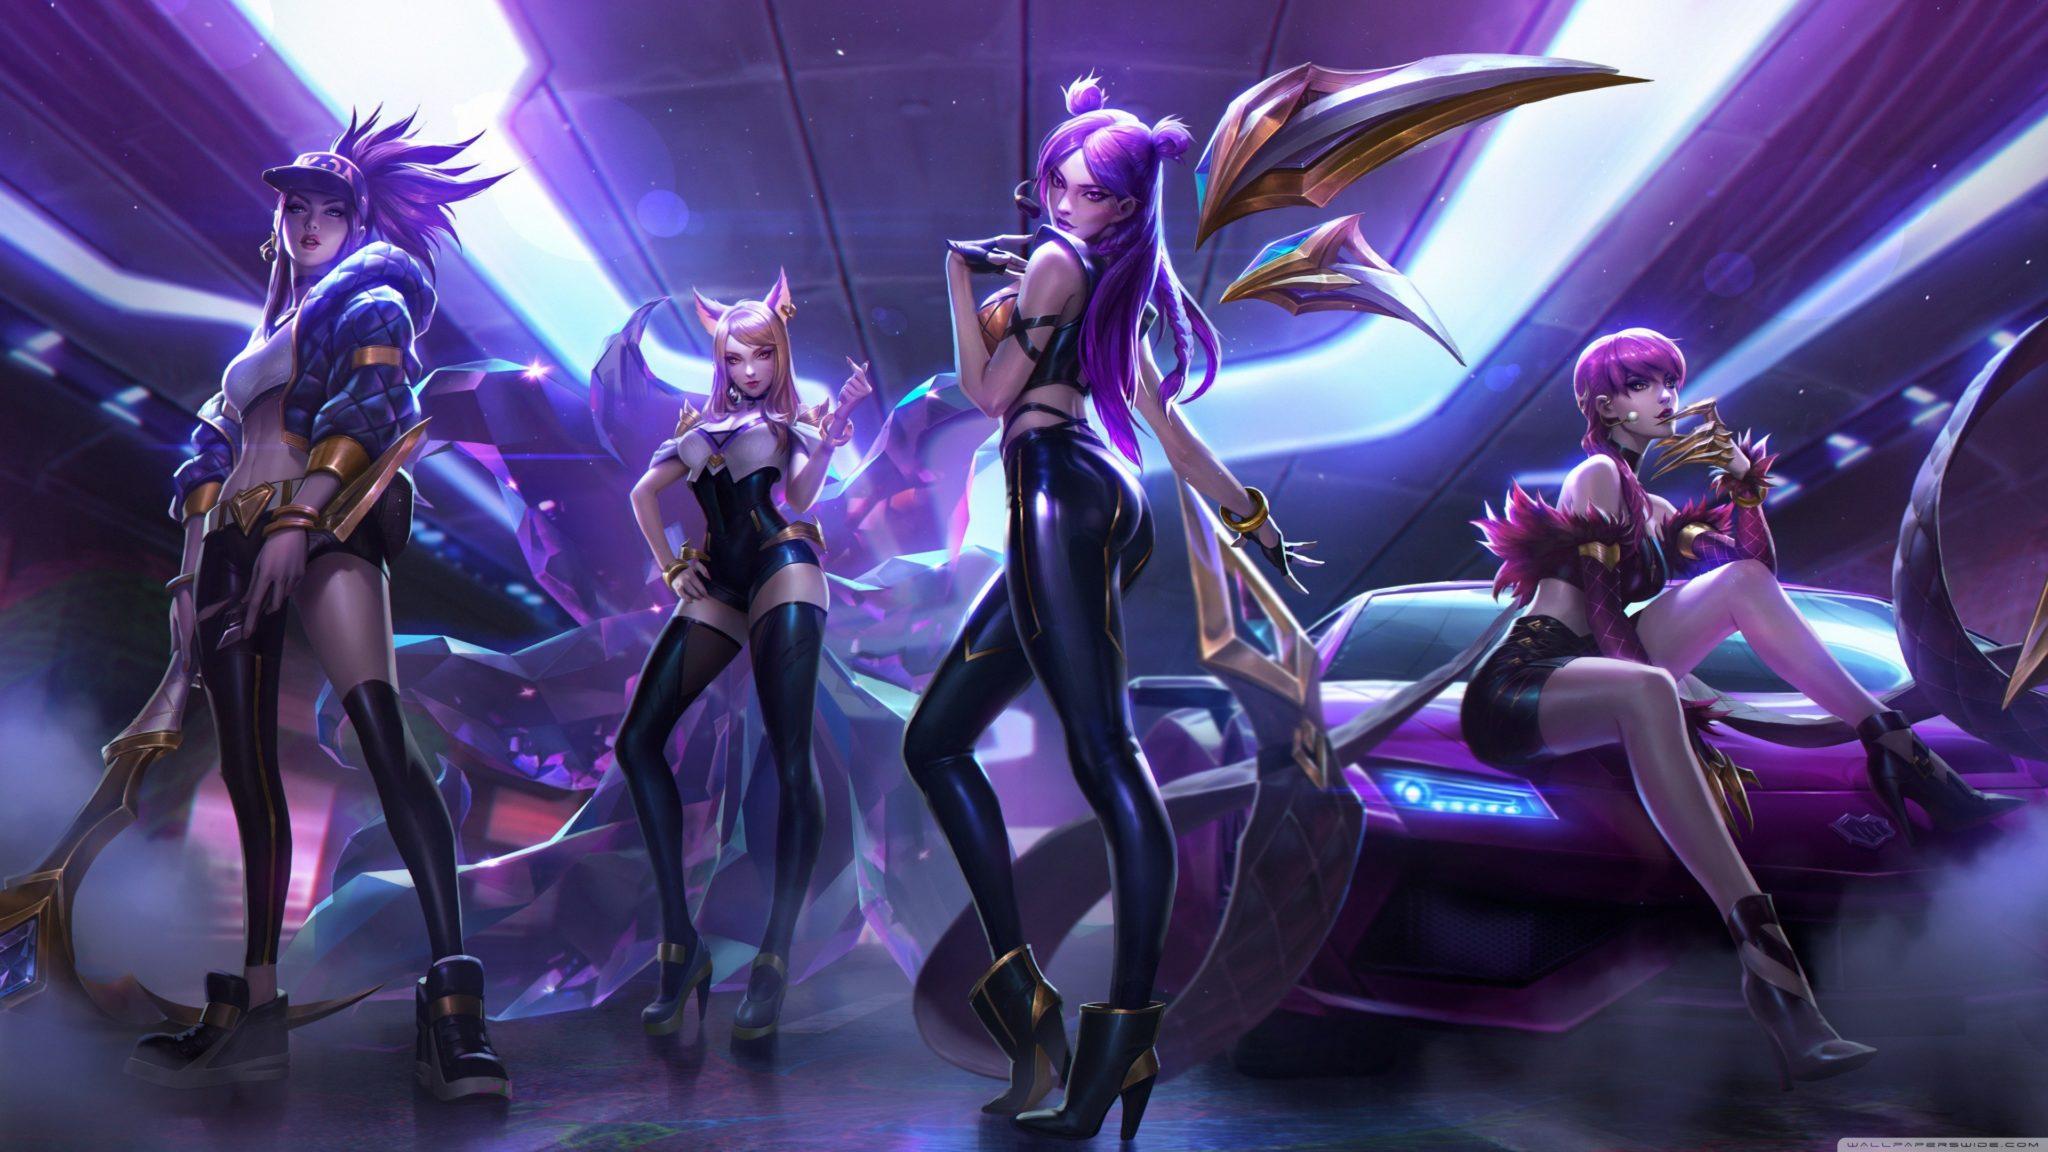 League of Legends' K/DA is working on a new song with Seraphine